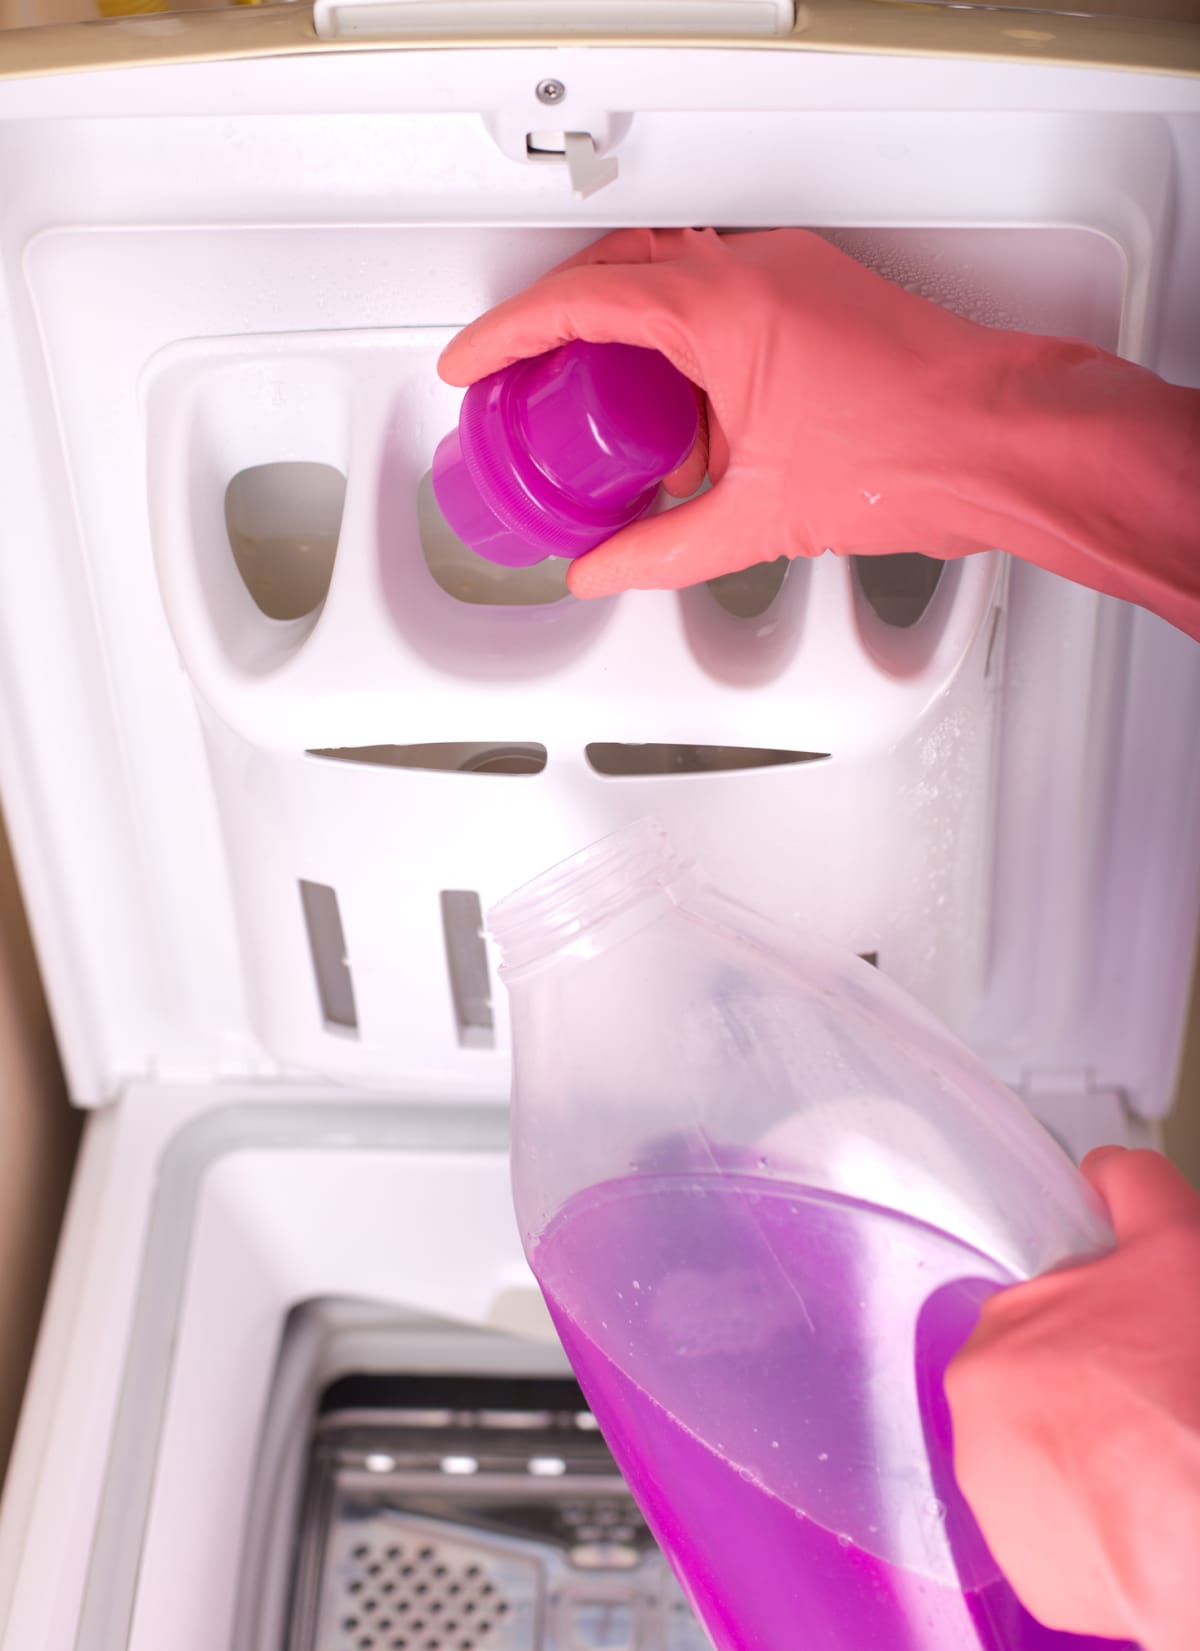 A person pouring detergent in a top-loading washing machine